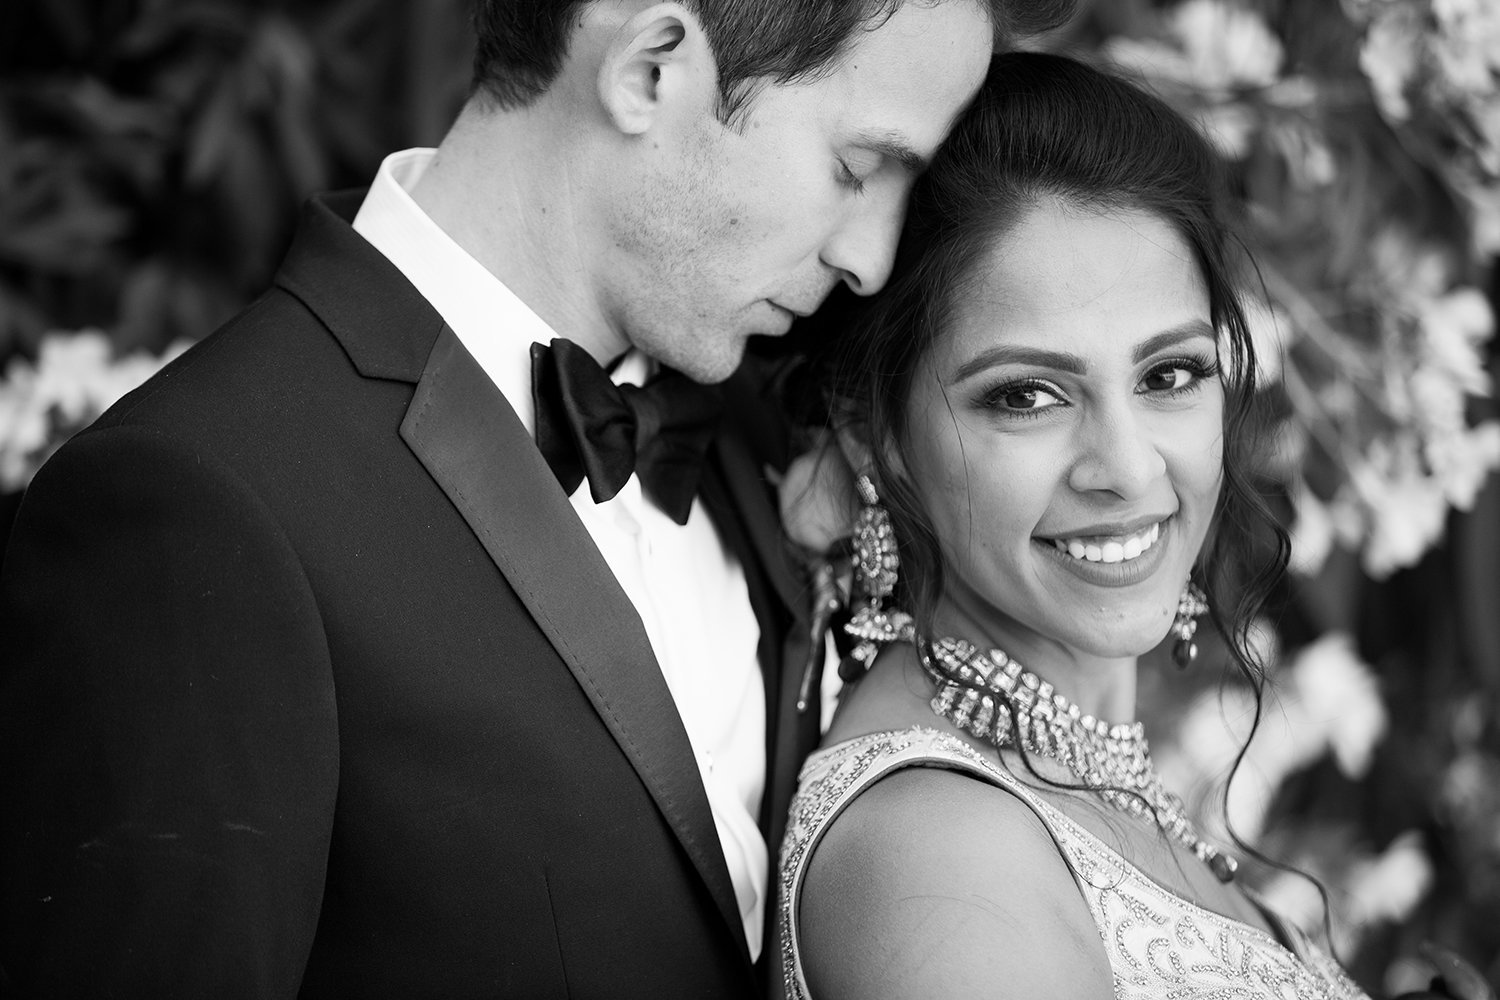 Nice black and white portrait of Indan bride and groom